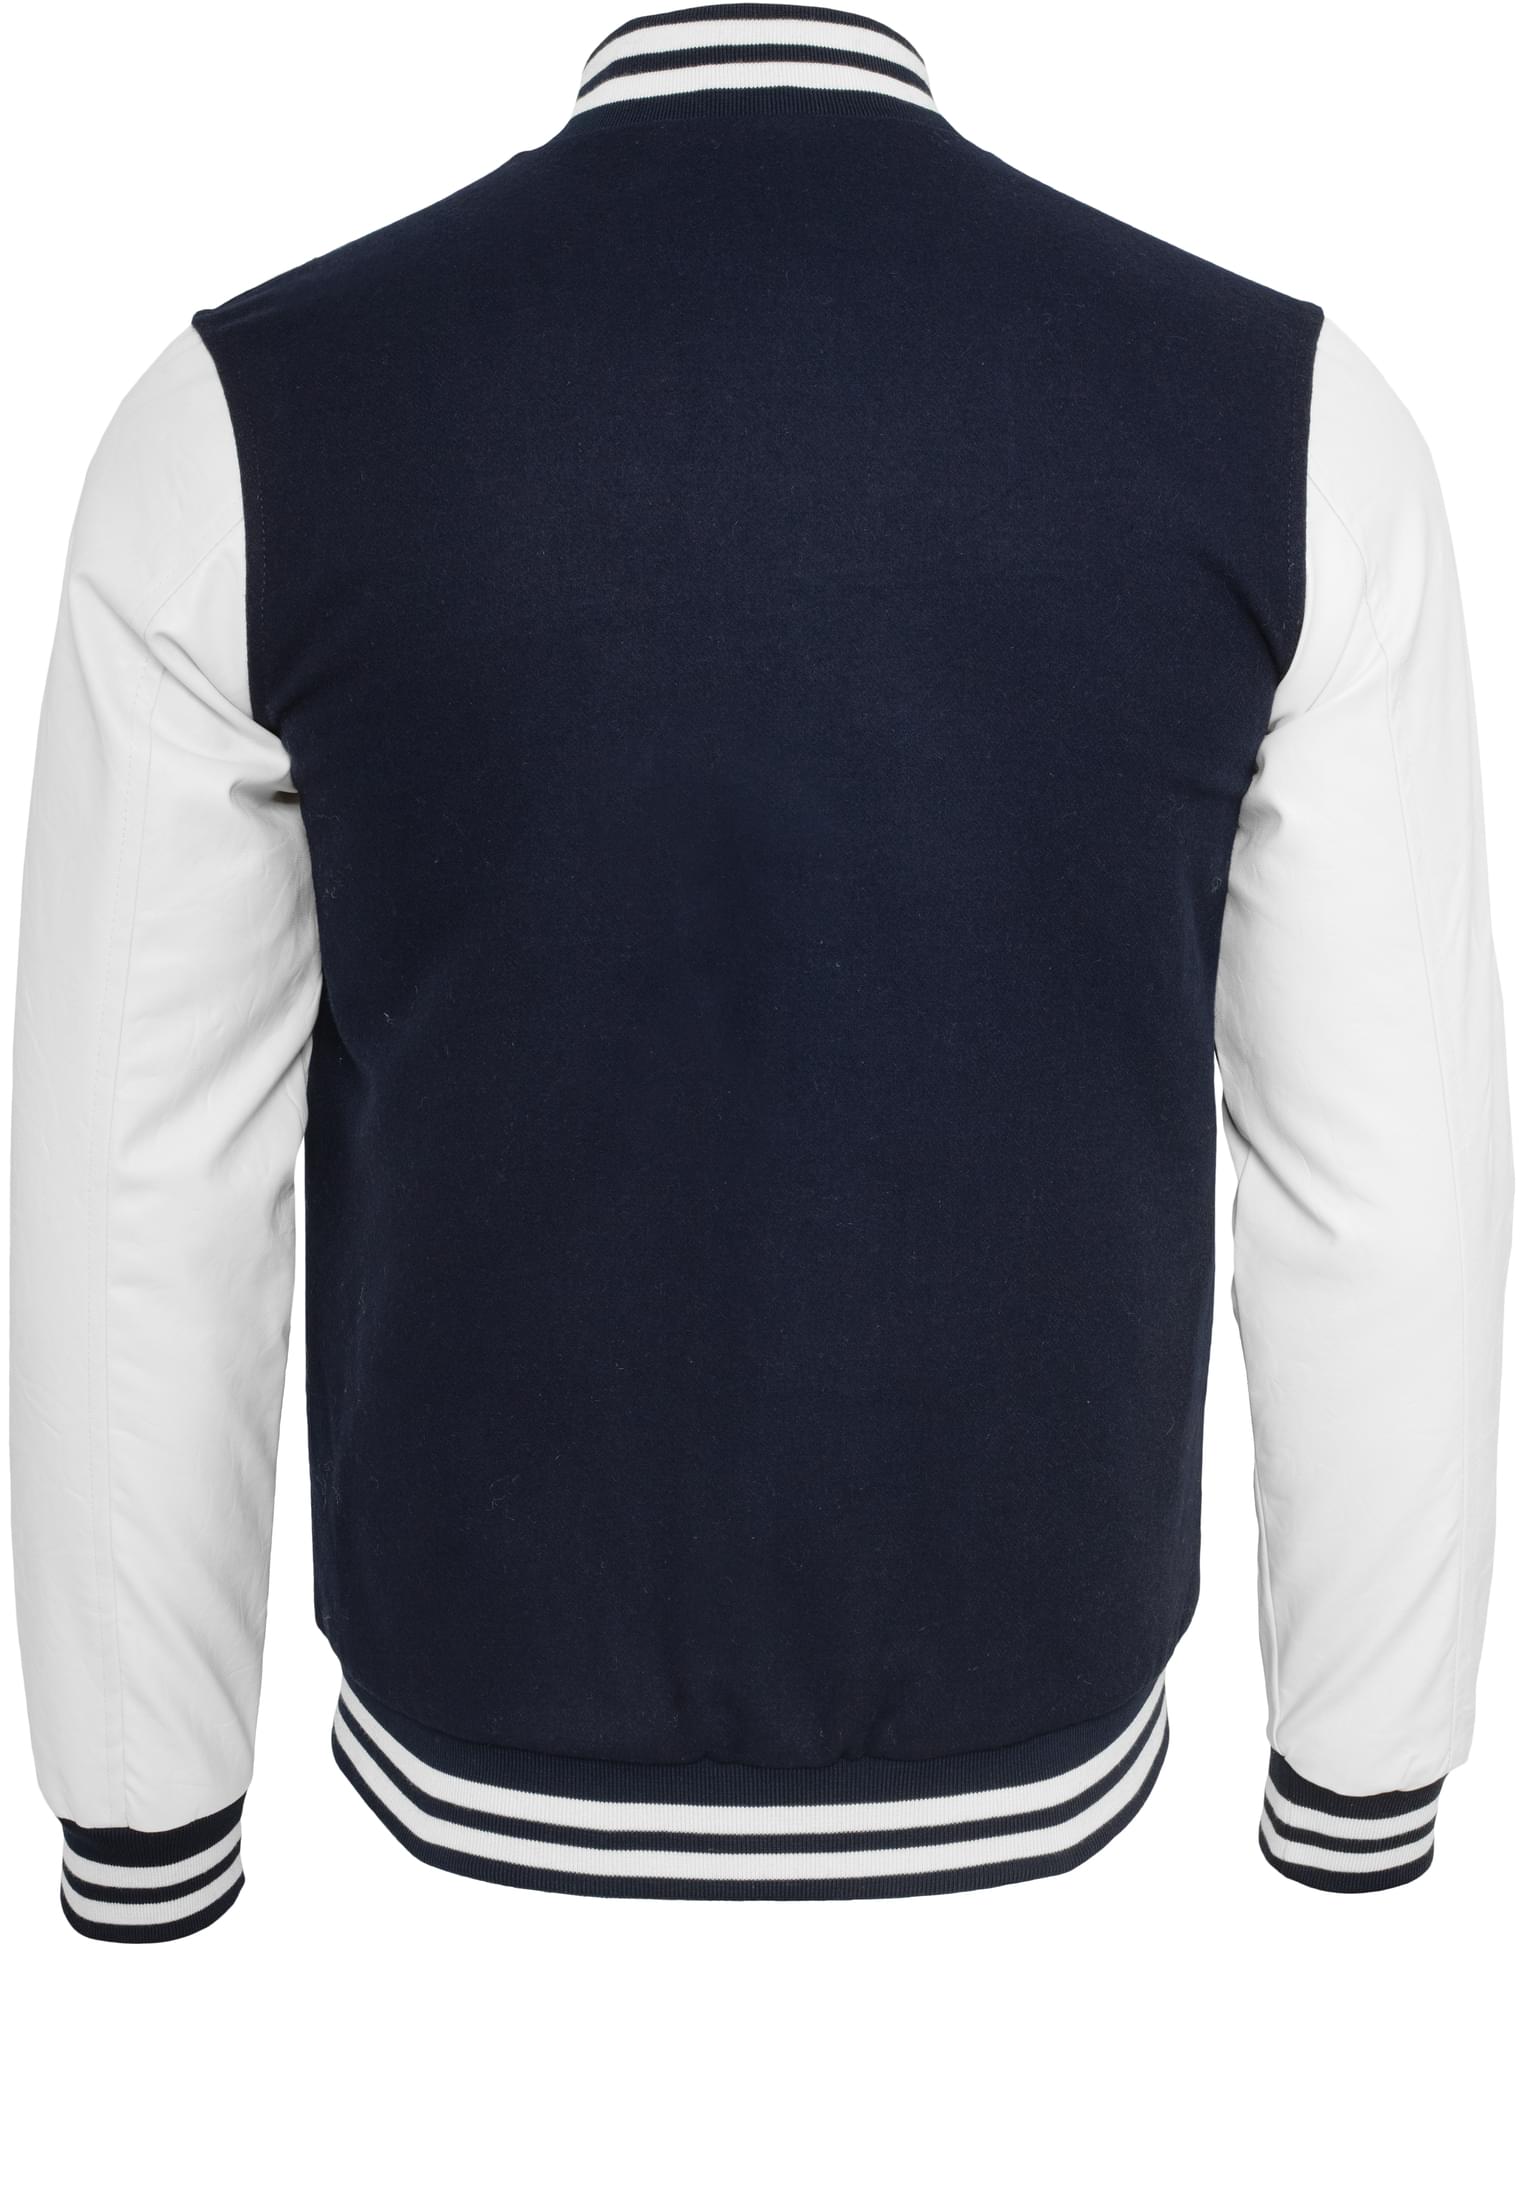 College Jacken Oldschool College Jacket in Farbe nvy/wht